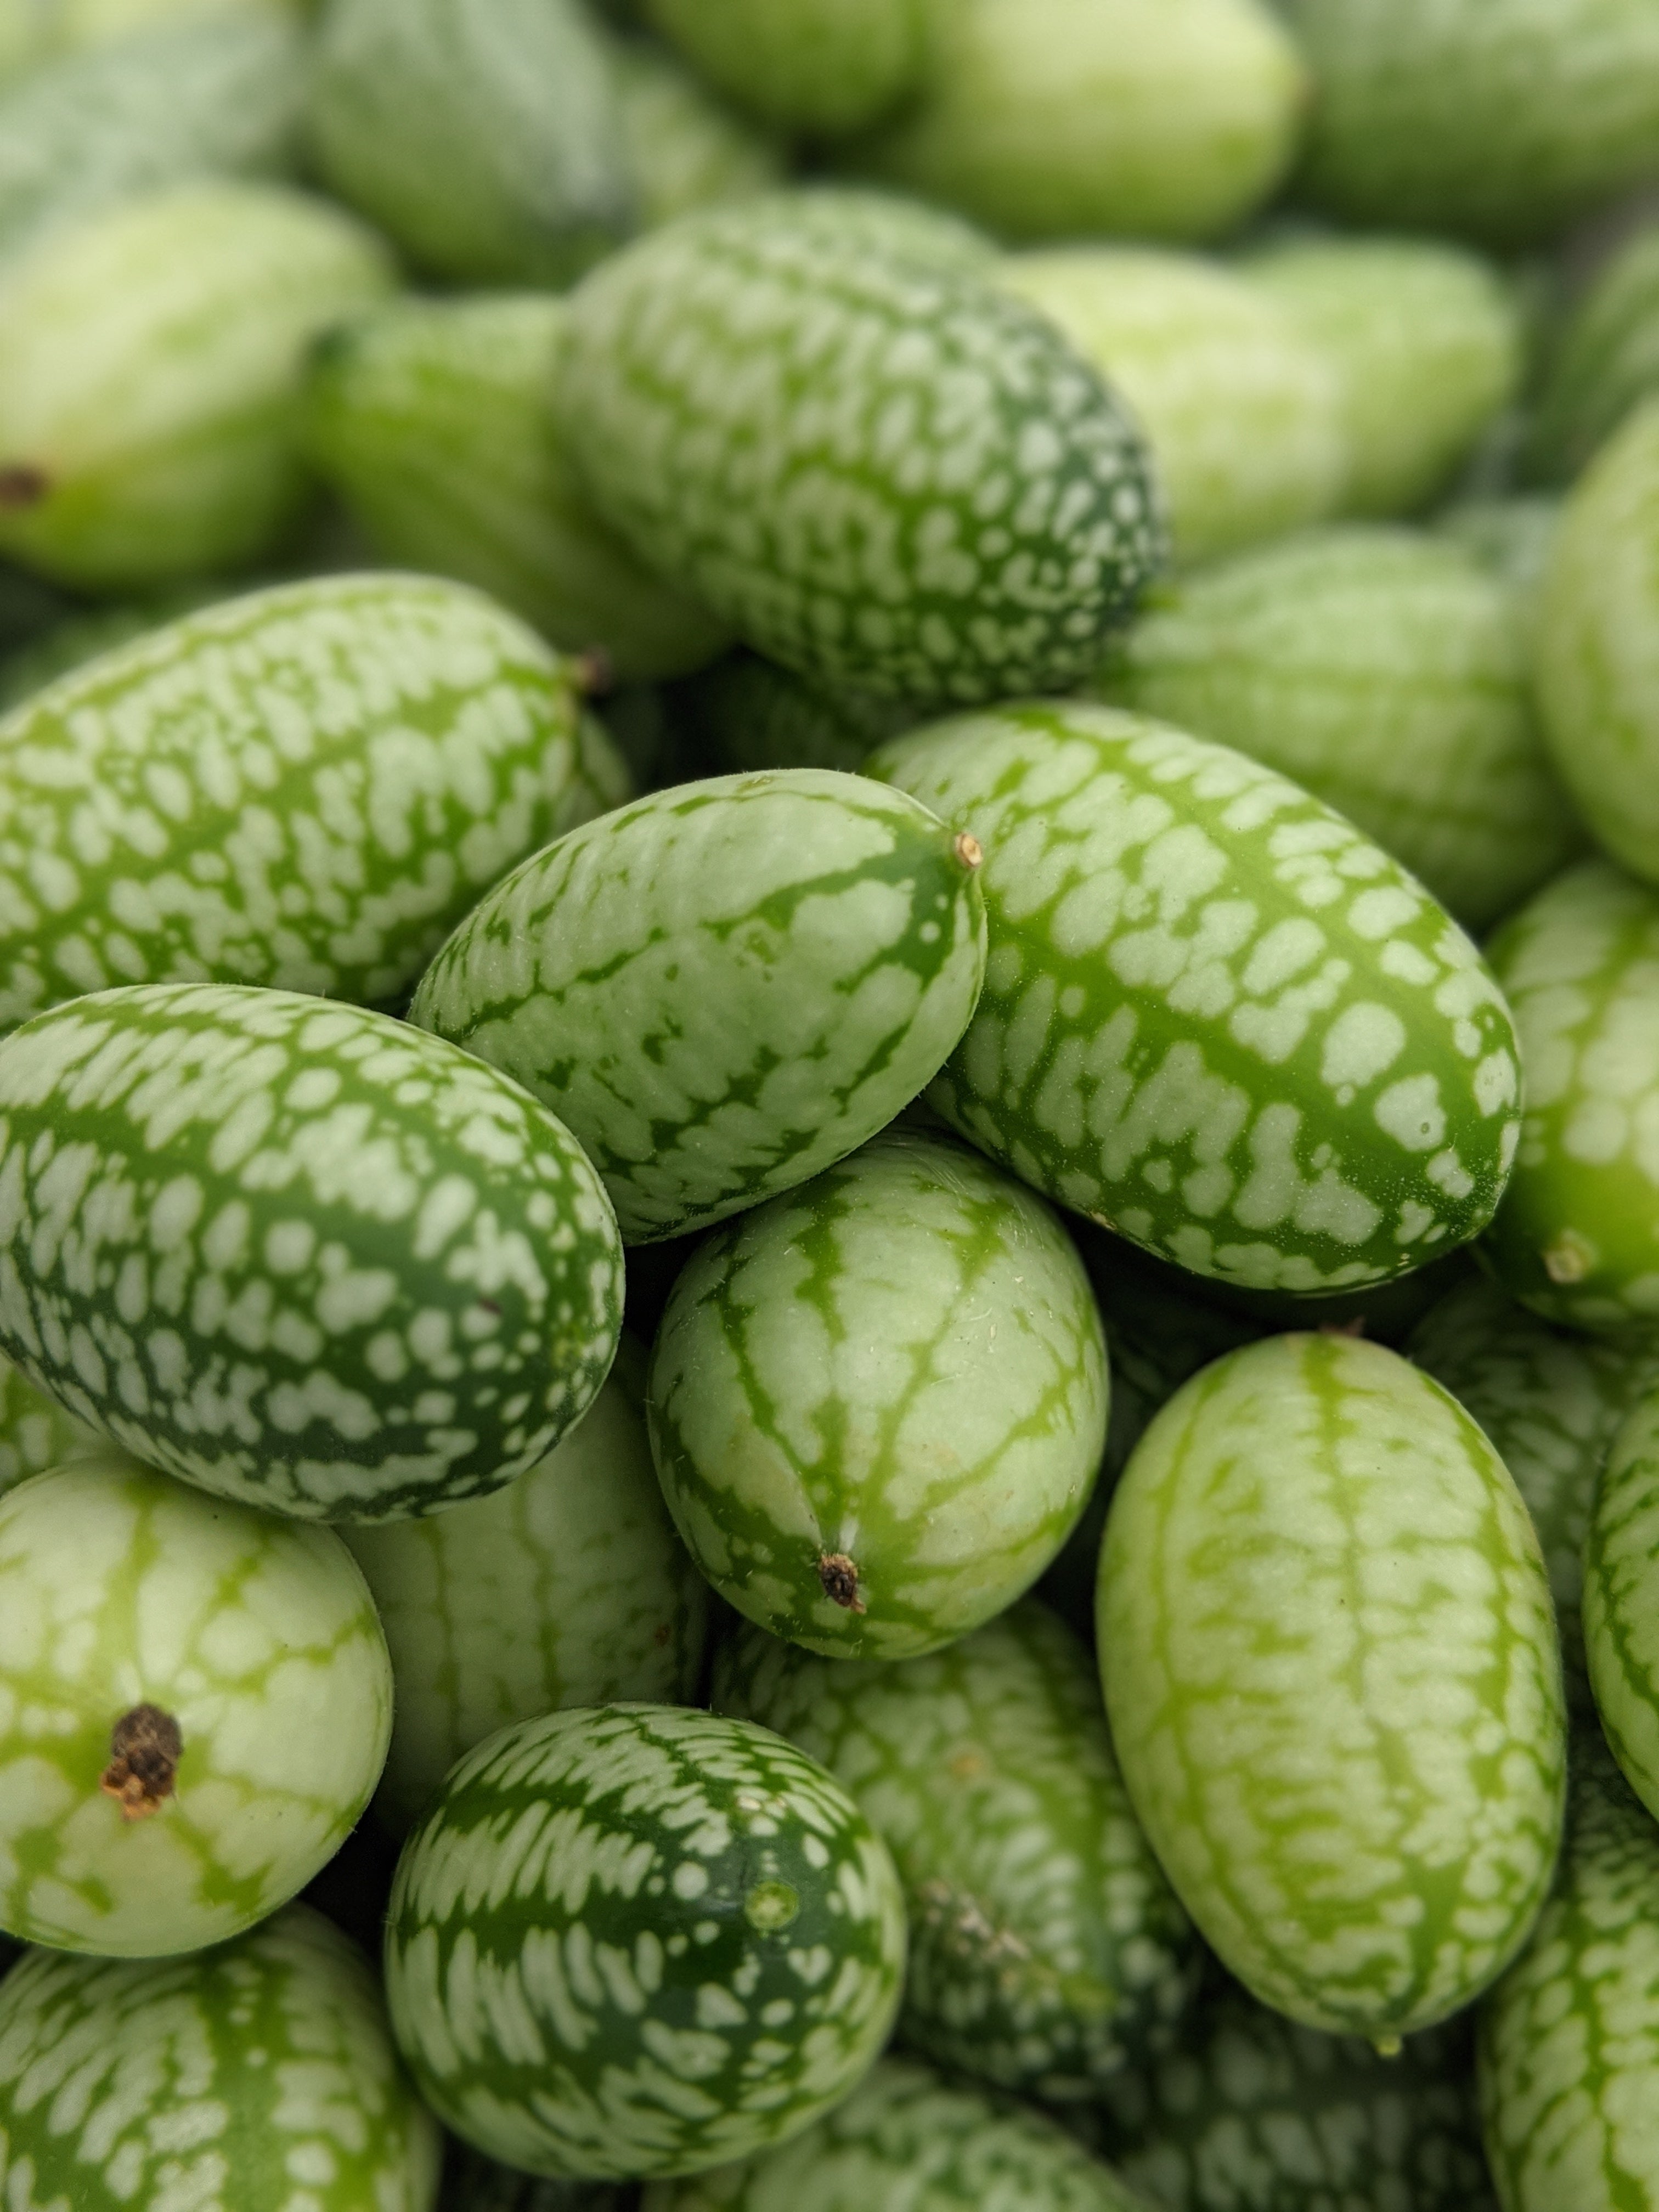 Vibrant home grown cucamelons, they look like baby watermelons and taste like a cucumber. Great for pickles!